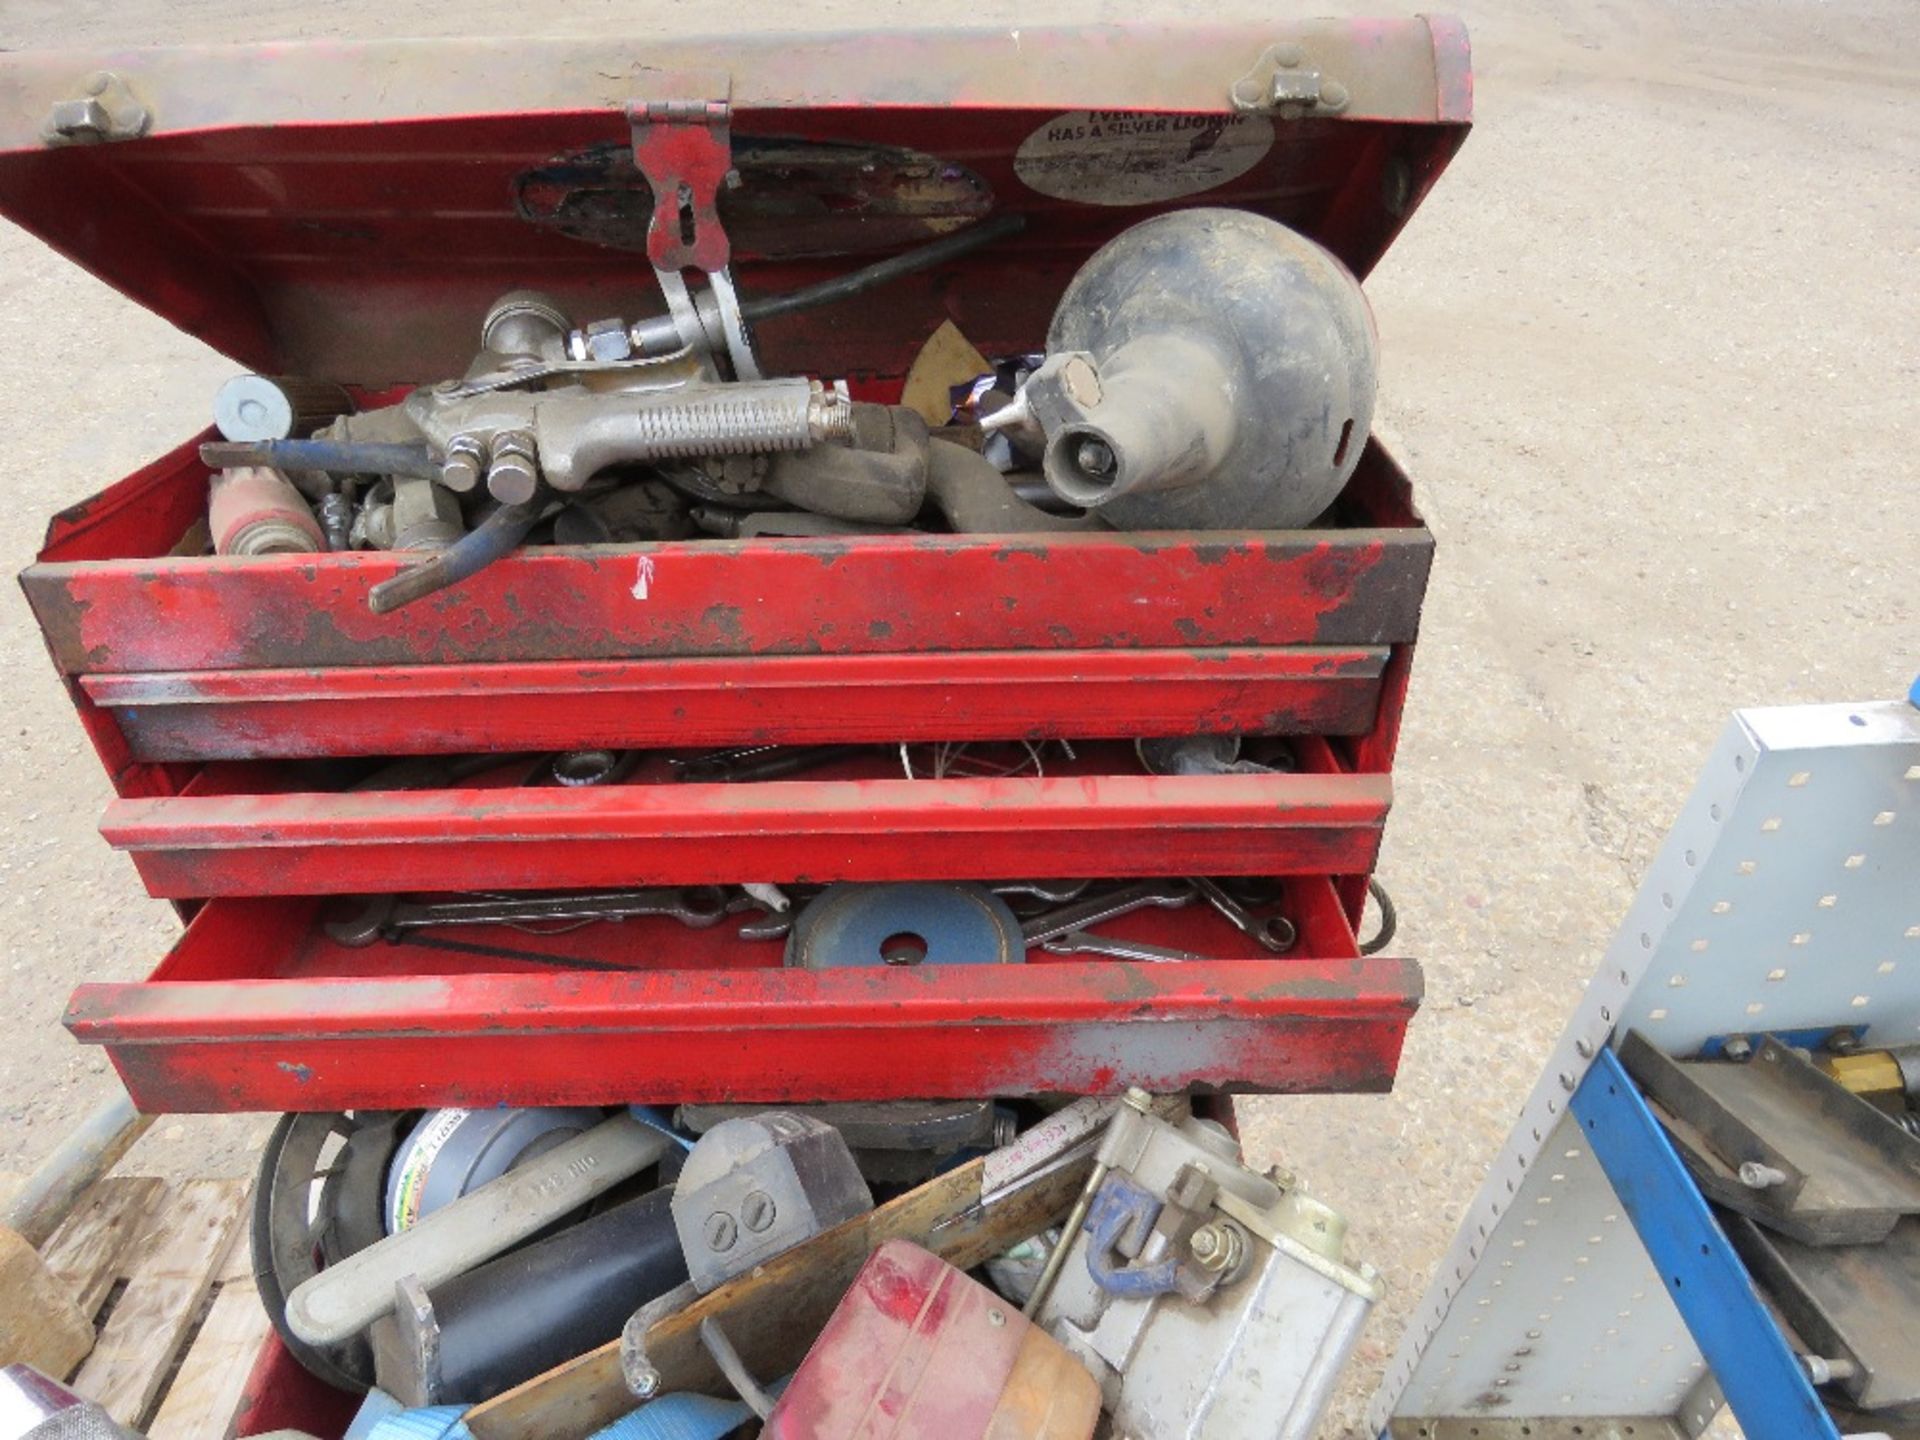 2 X WHEELED WORKSHOP TROLLEYS WITH TOOLS, PARTS, AIR NUT GUN AND SOCKETS ETC. SOURCED FROM DEPOT CLO - Image 6 of 6